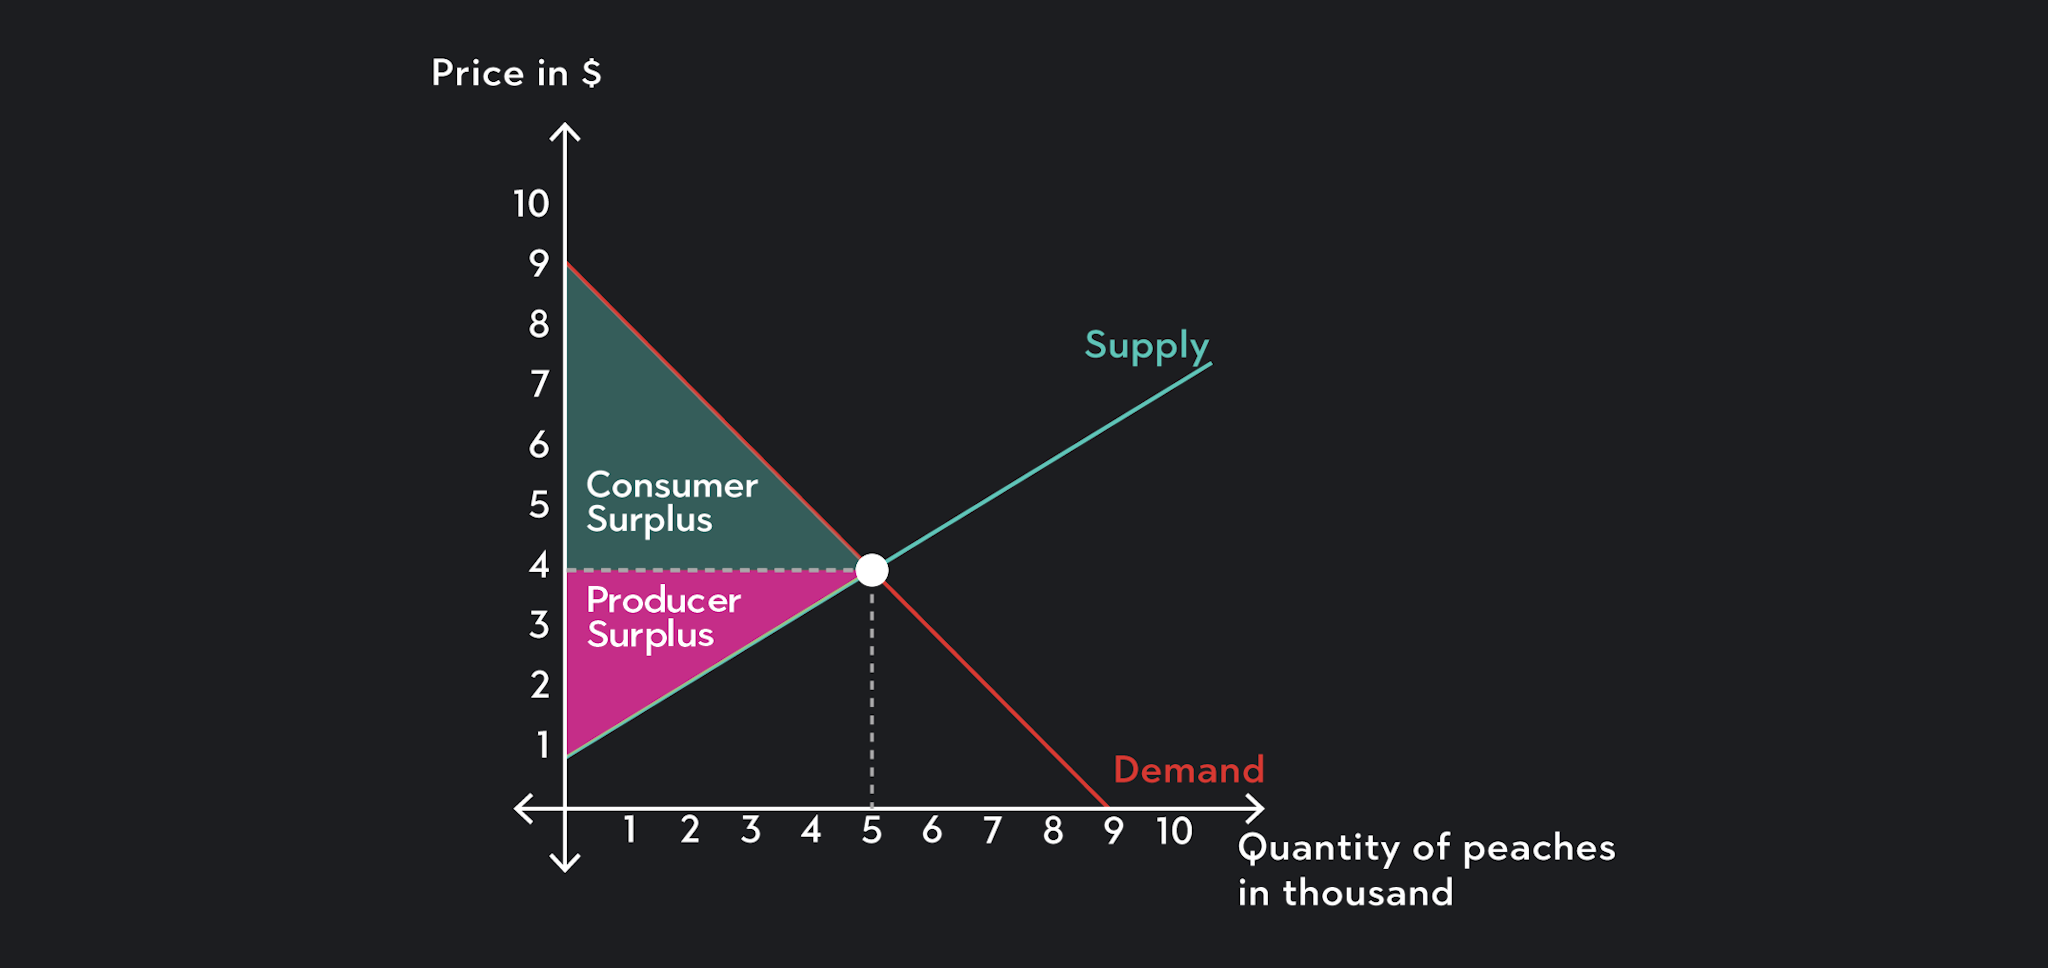 This graph shows consumer surplus, producer surplus, and total surplus for a perfectly competitive market. 